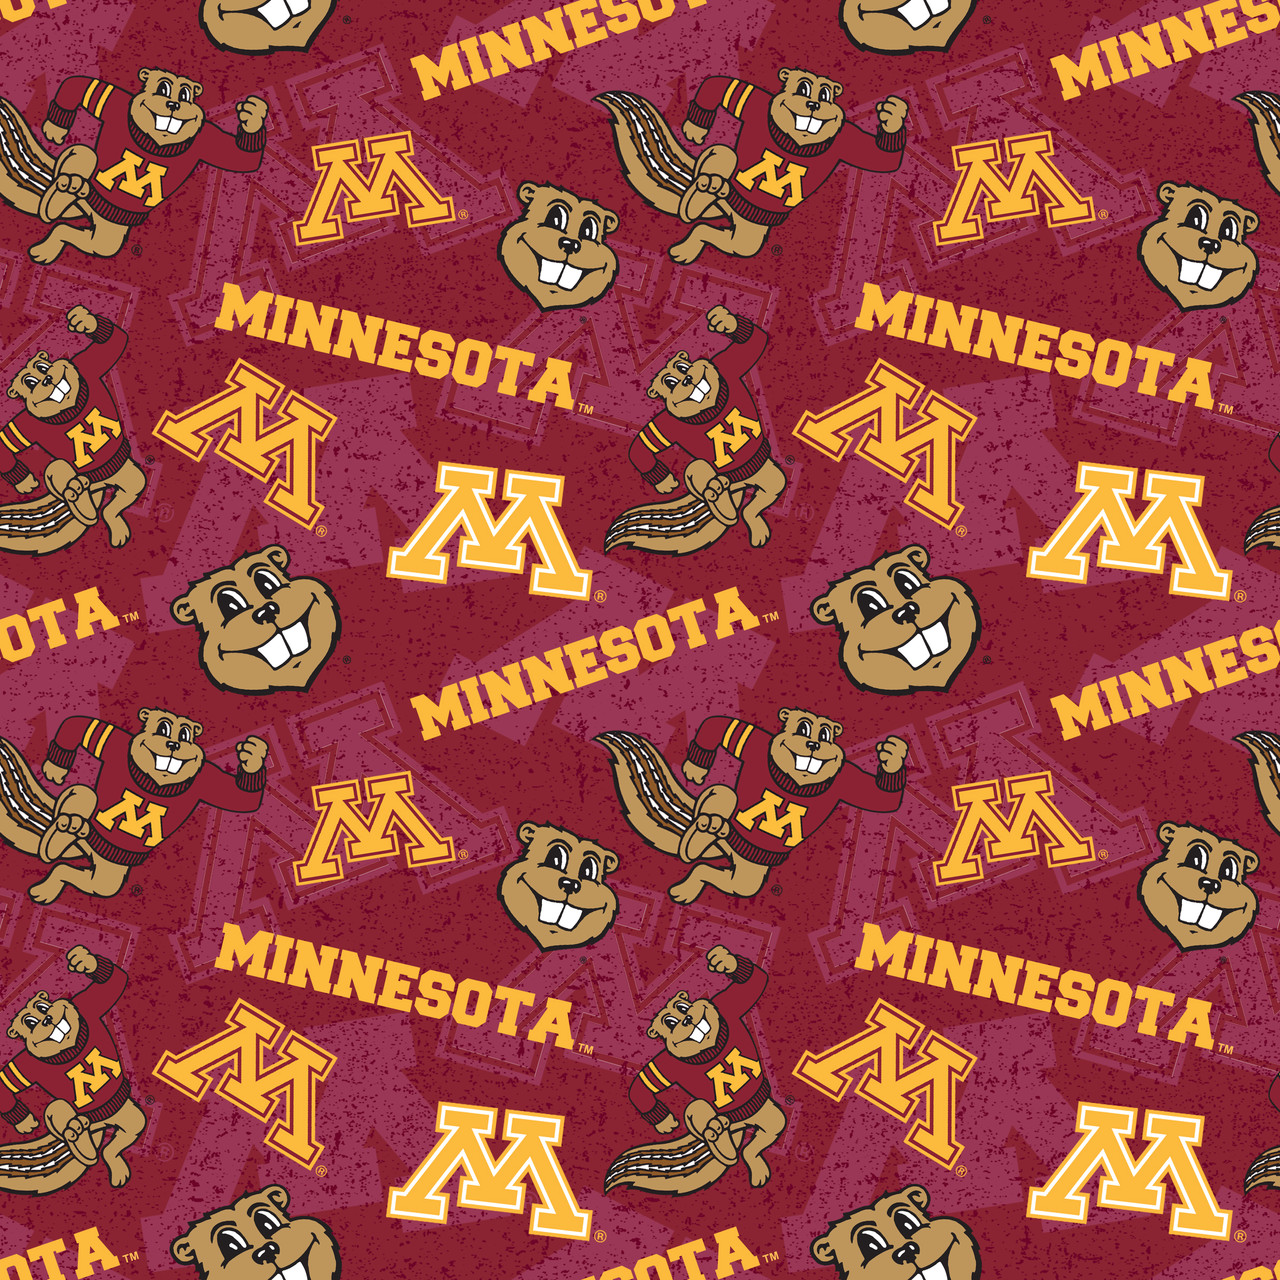 University of Minnesota Golden Gophers Cotton Fabric with Tone On Tone Print or Matching Solid Cotton Fabrics